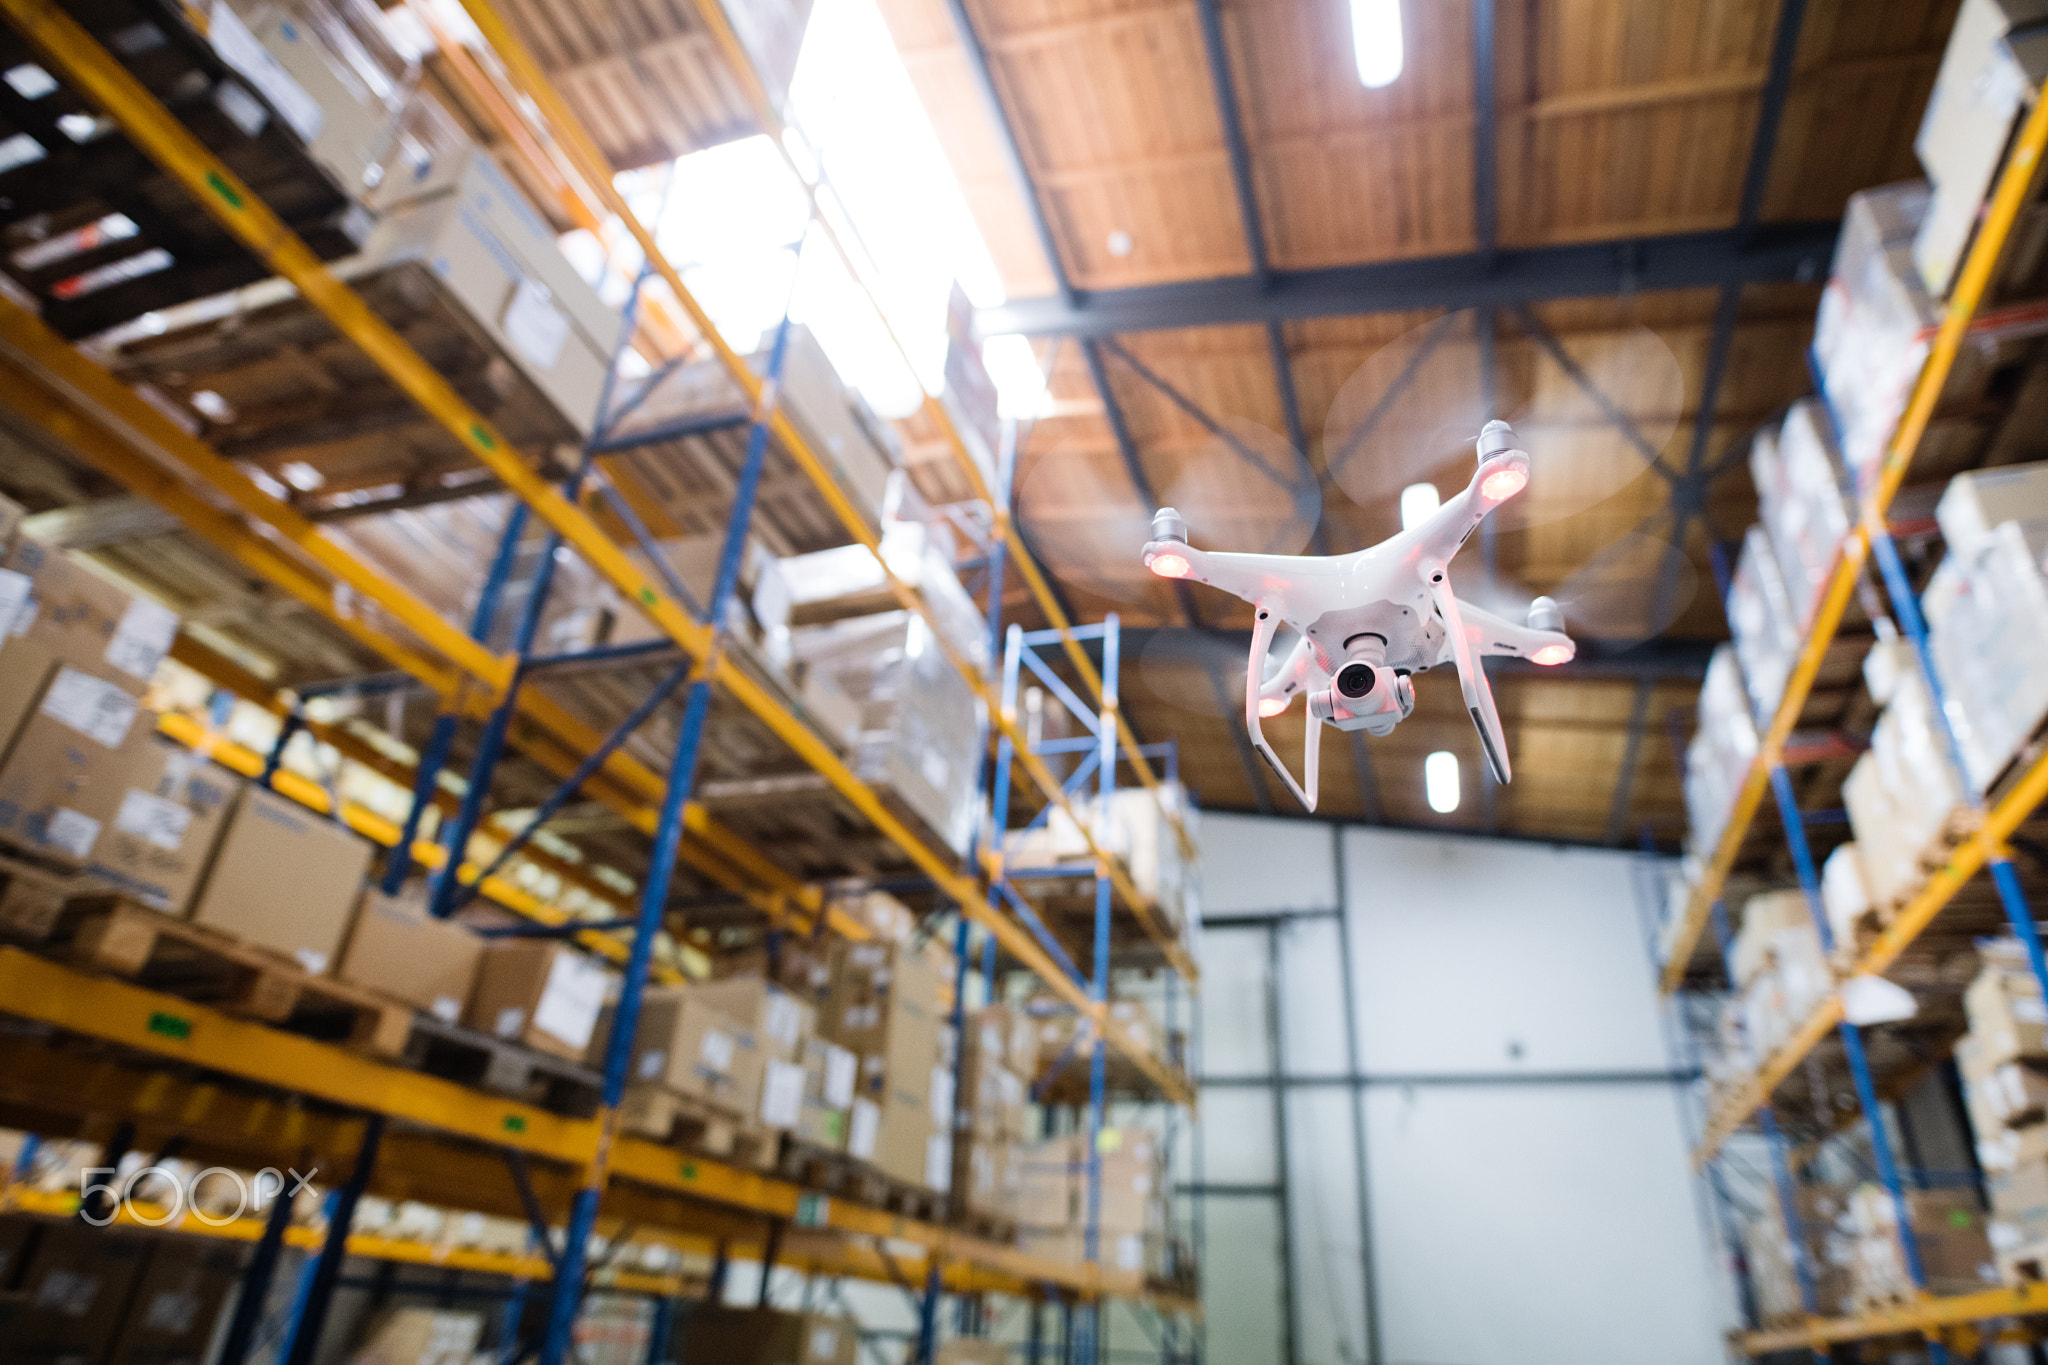 Drone flying inside the warehouse.